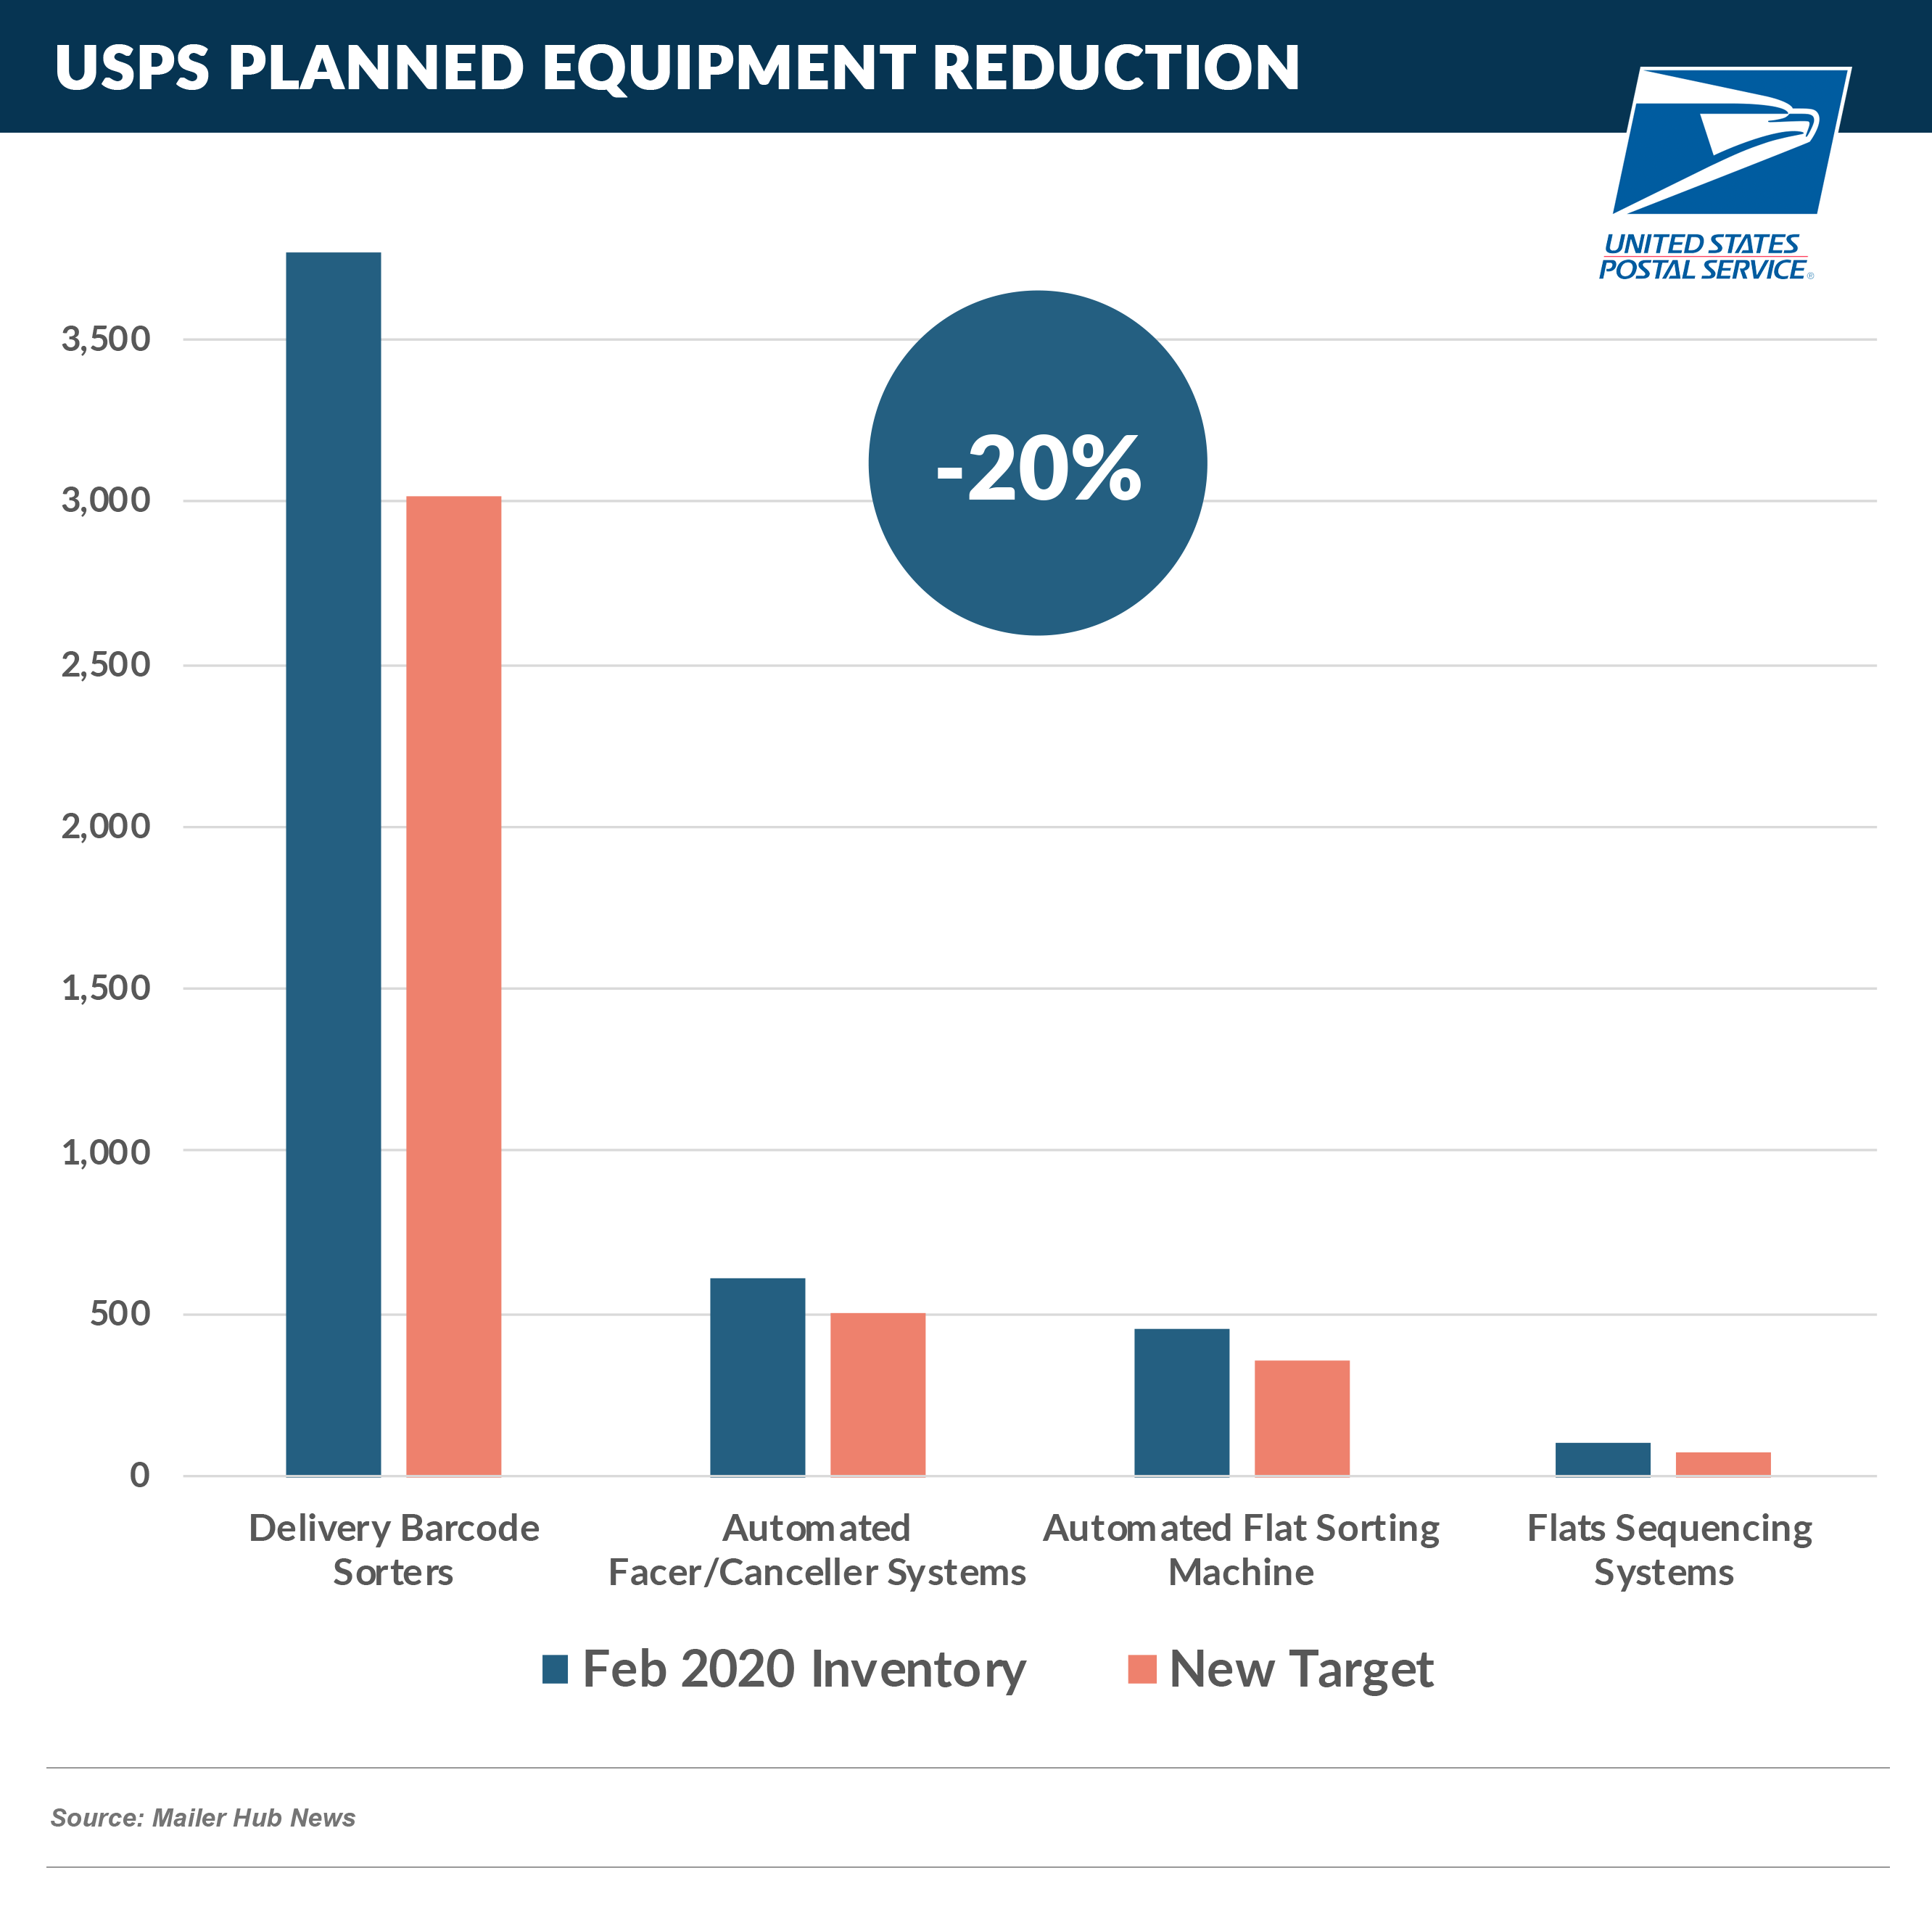 USPS Planned Equipment Reduction